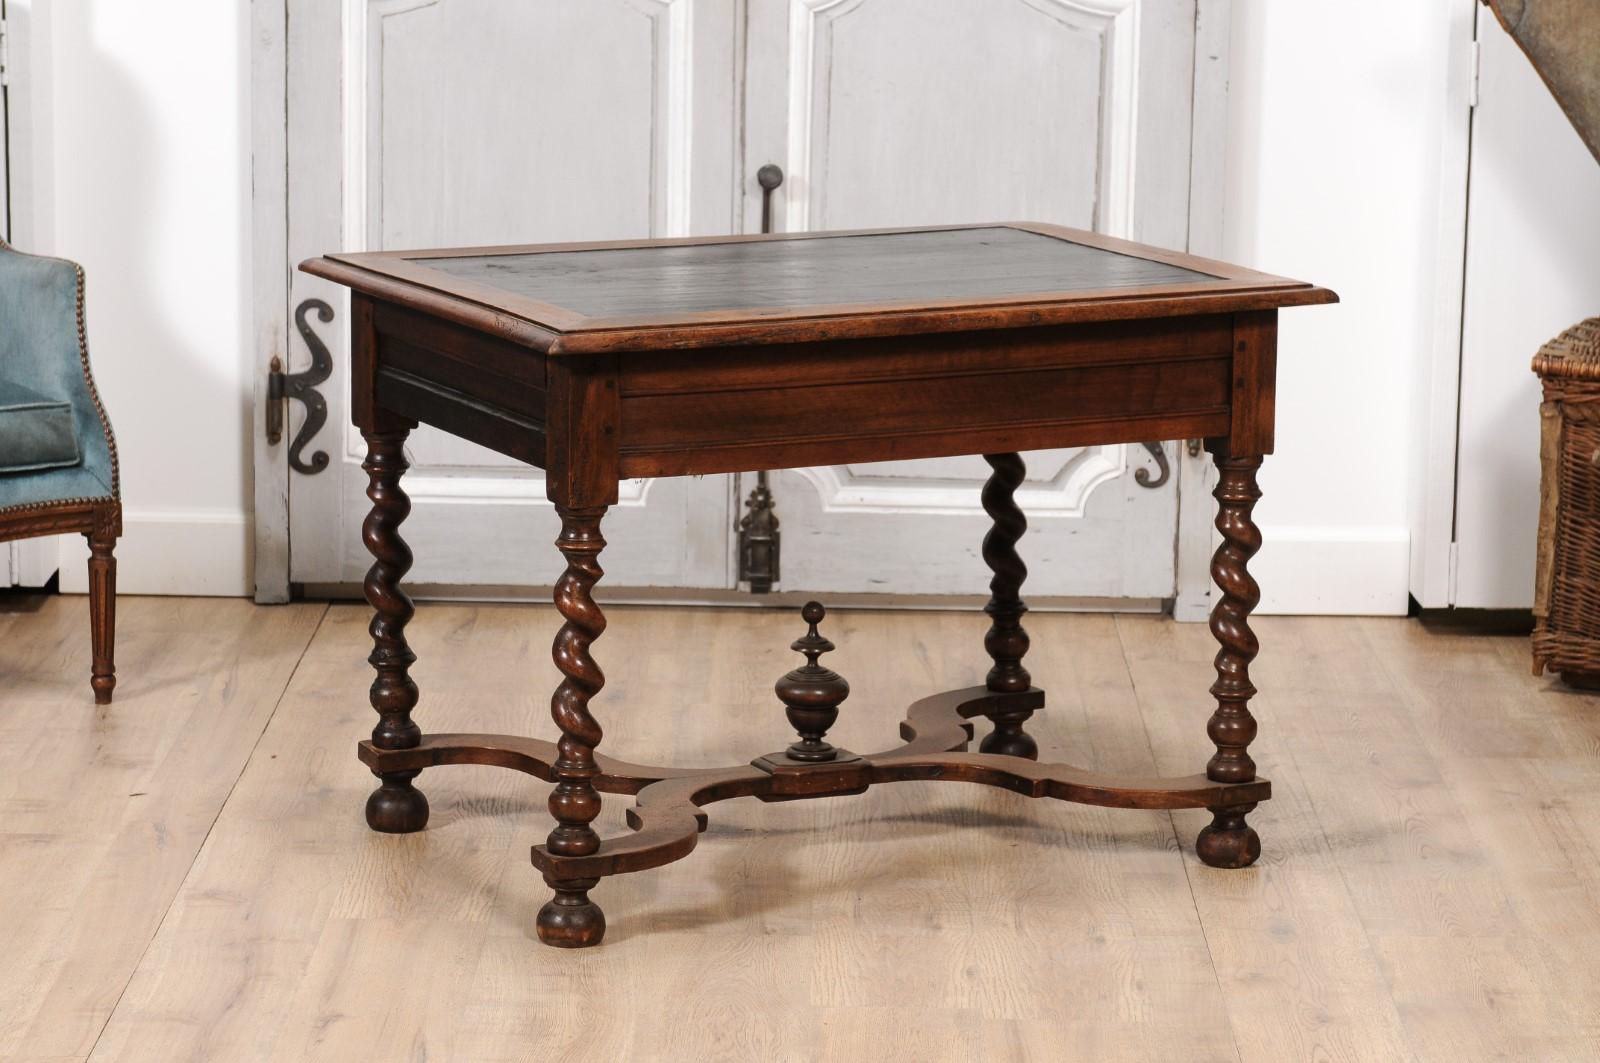 A French Louis XIII period walnut writing table from circa 1630 with two lateral drawers, barley twist base, black painted top and carved X-Form cross stretcher accented with central finial. Lose yourself in the grandeur of French history with this